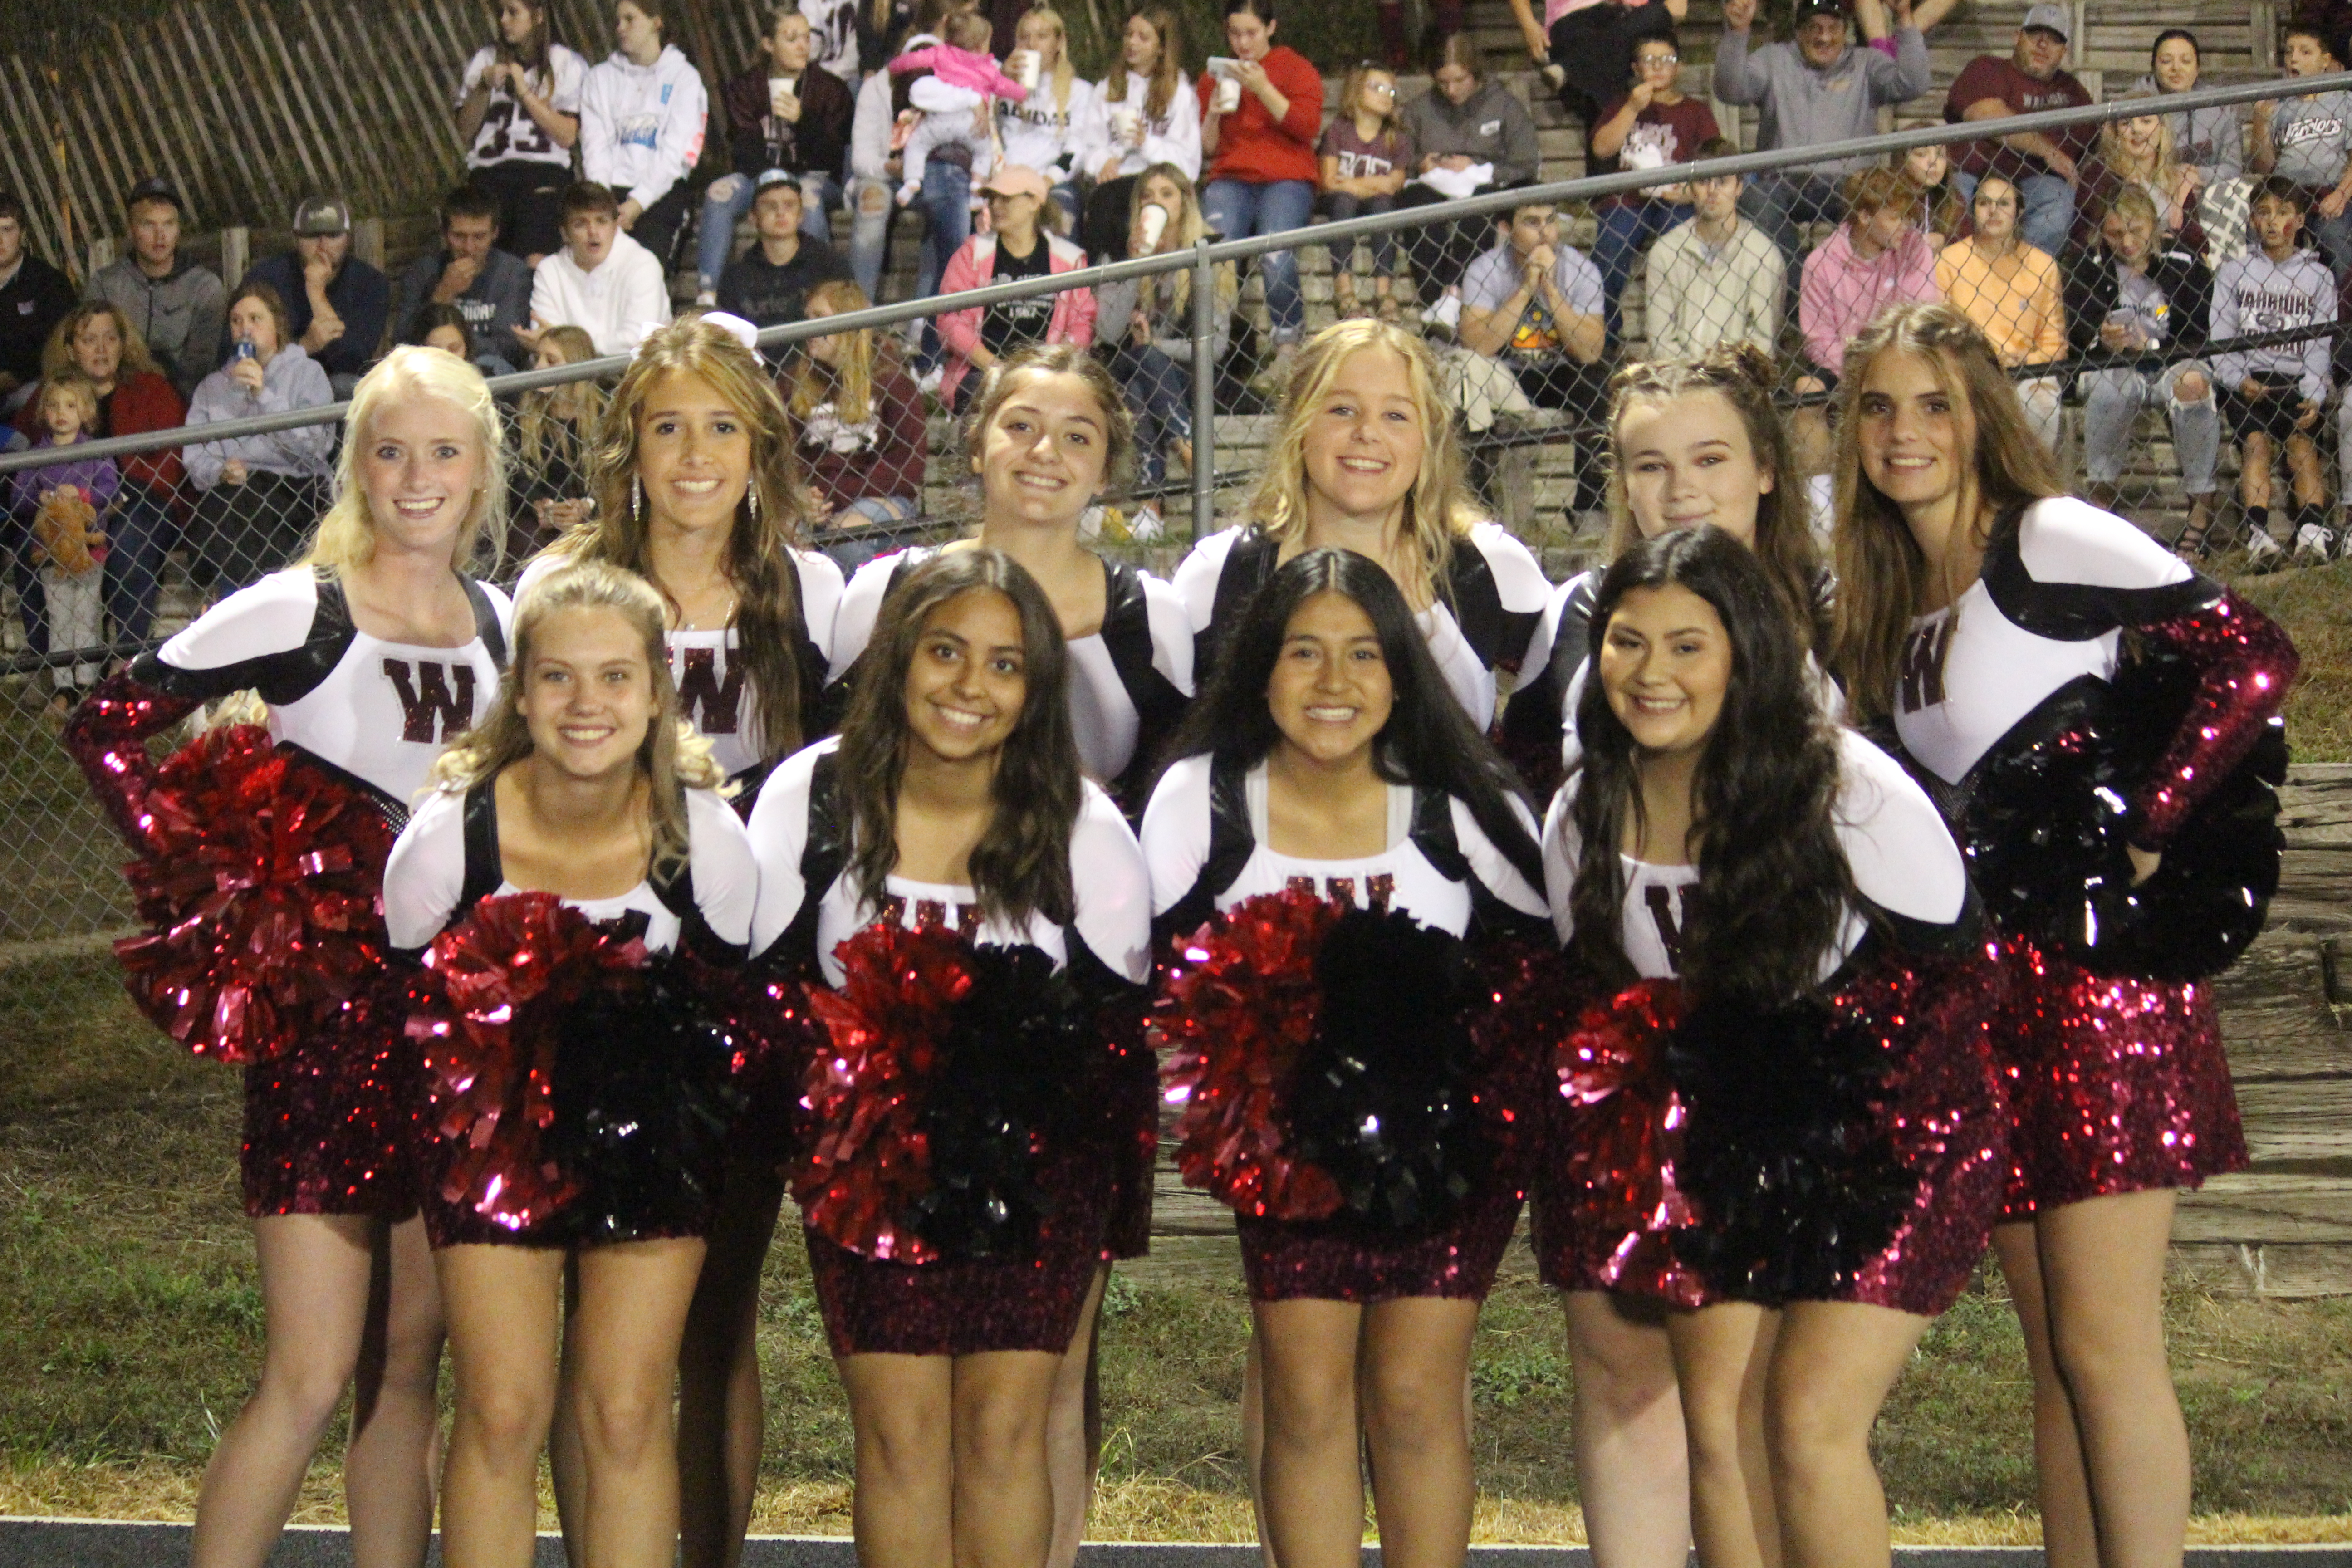 The Dance Team takes pictures as they get ready to perform at the homecoming football game at halftime.